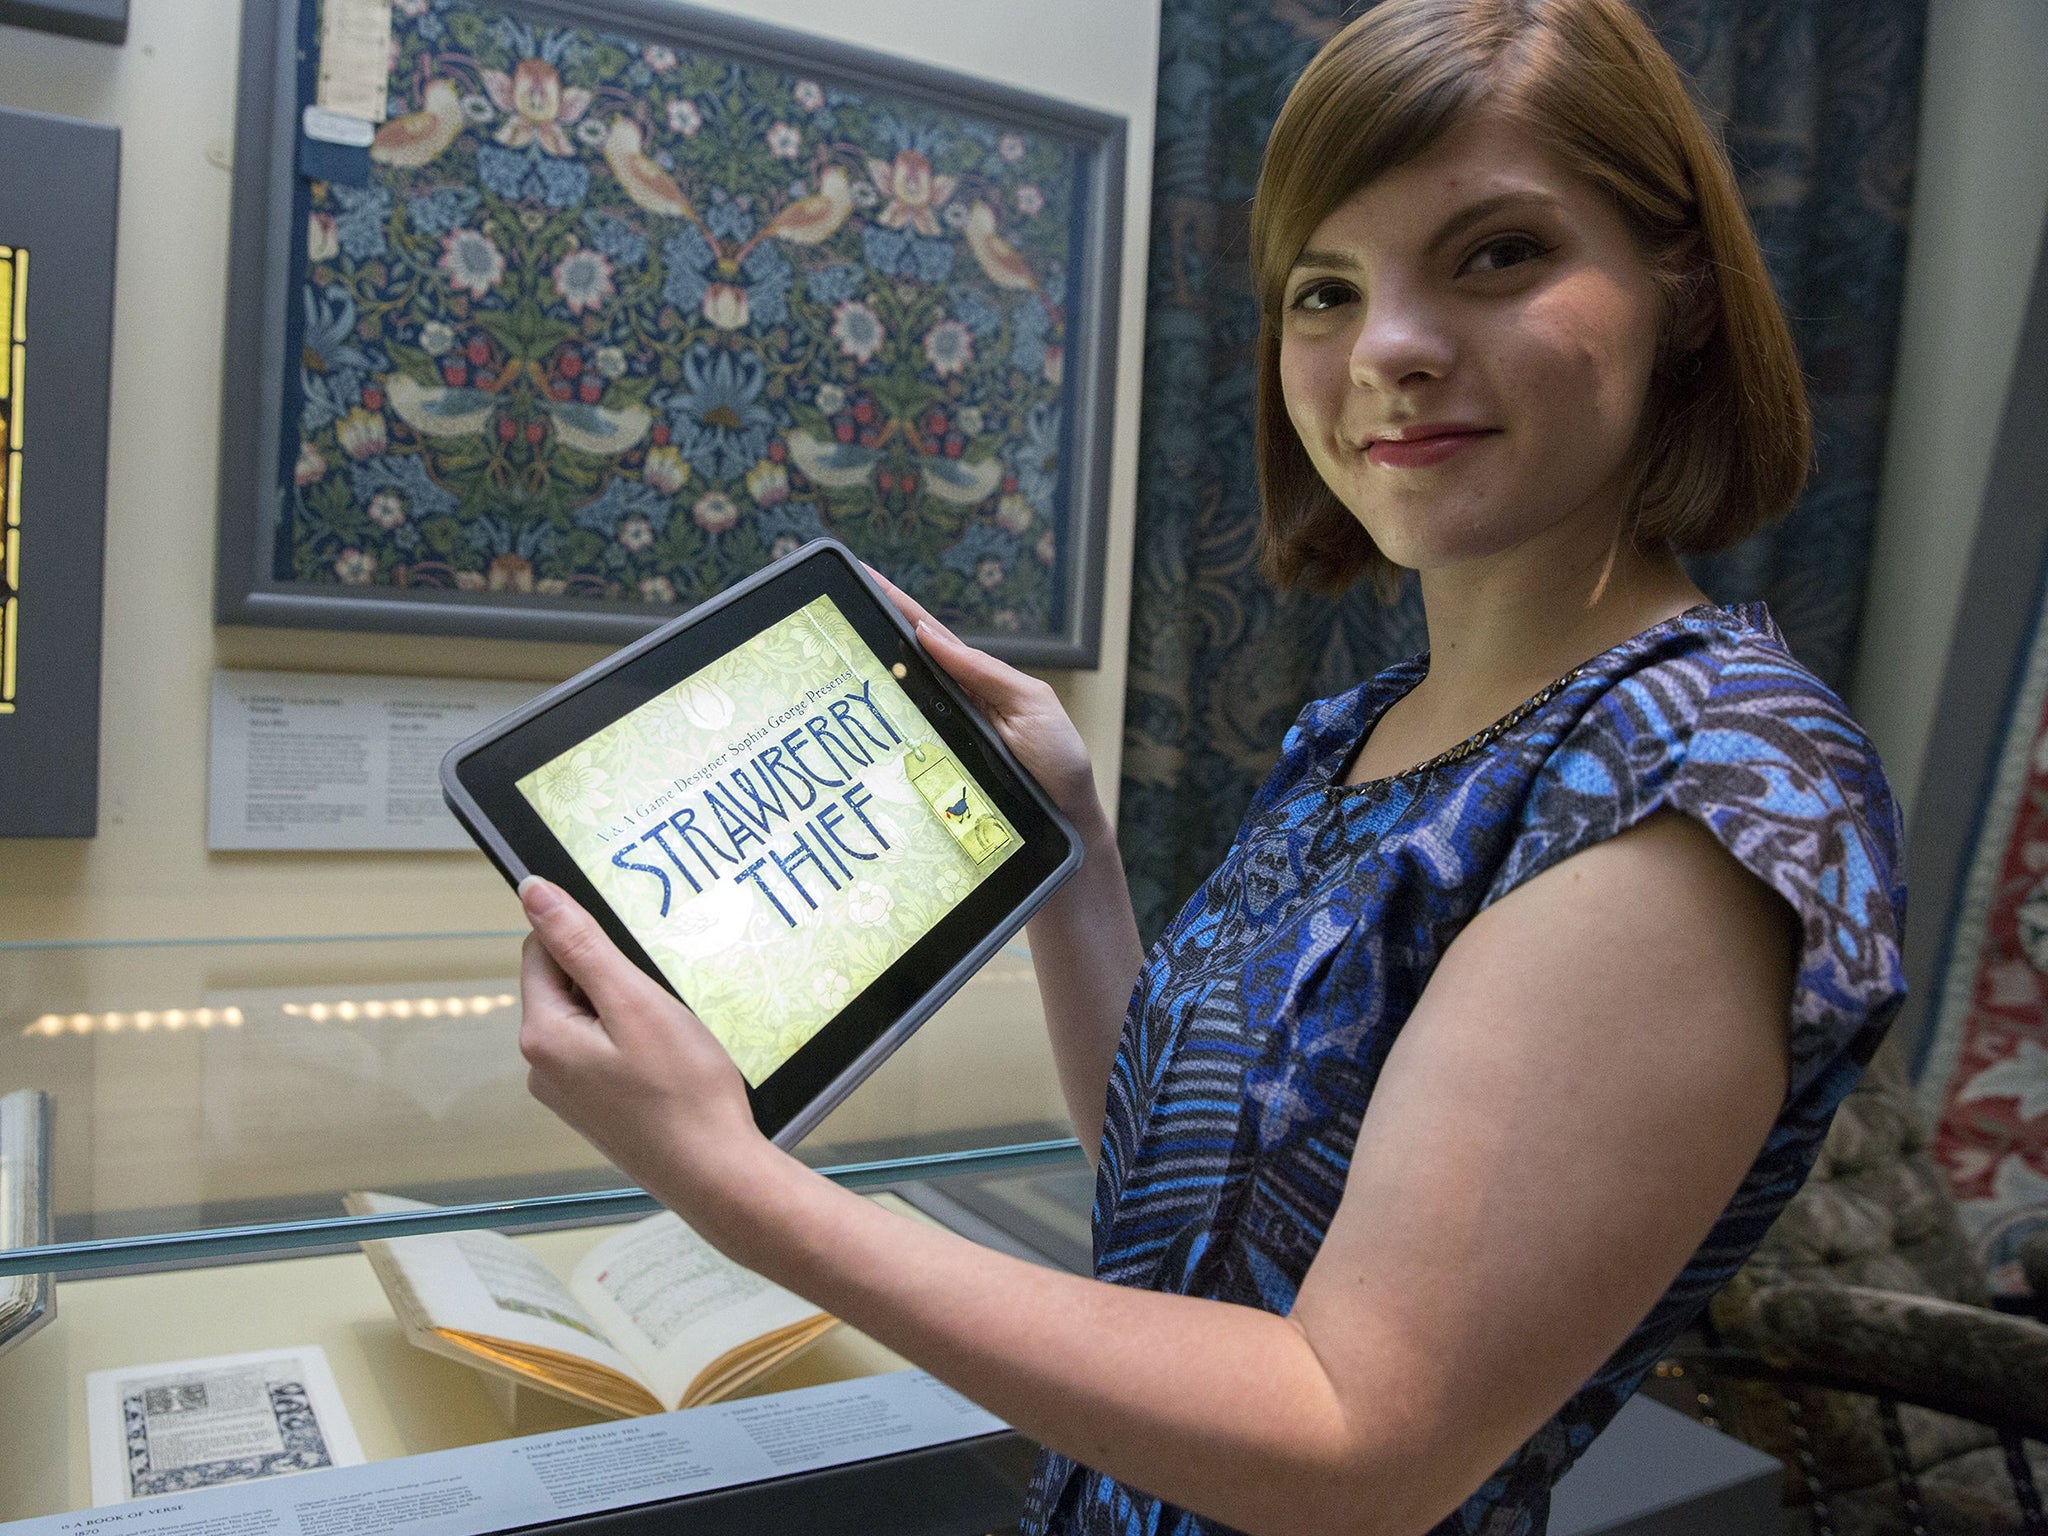 Game Designer in Residence Sophie George with her iPad game inspired by the work of William Morris